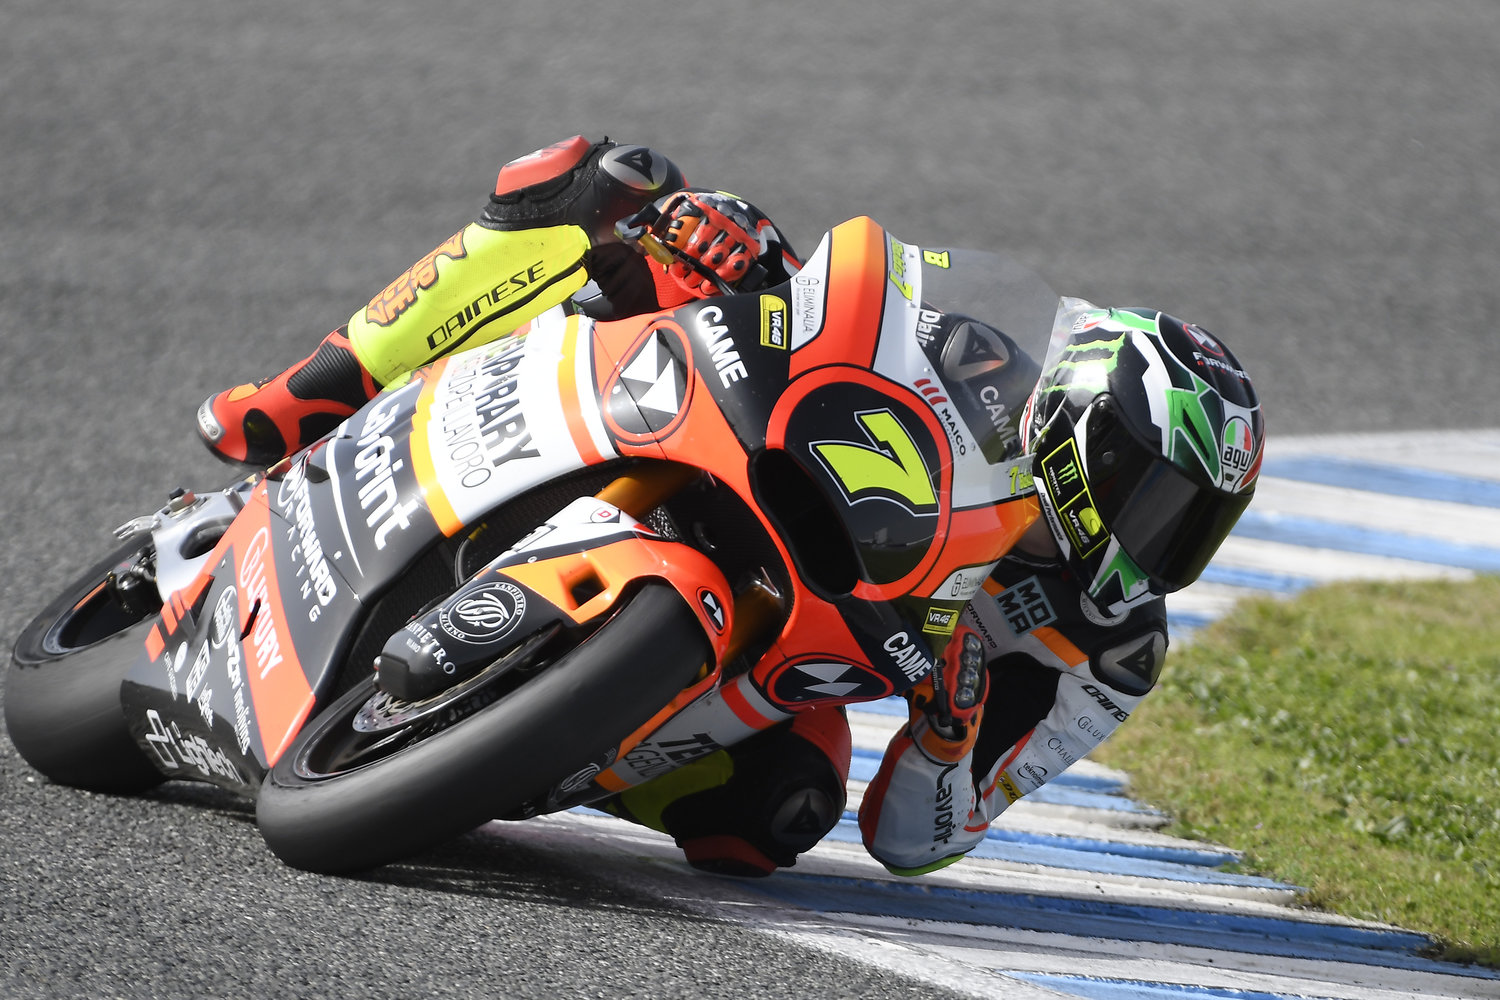 Baldassarri forced to miss opening stages of IRTA test in Jerez